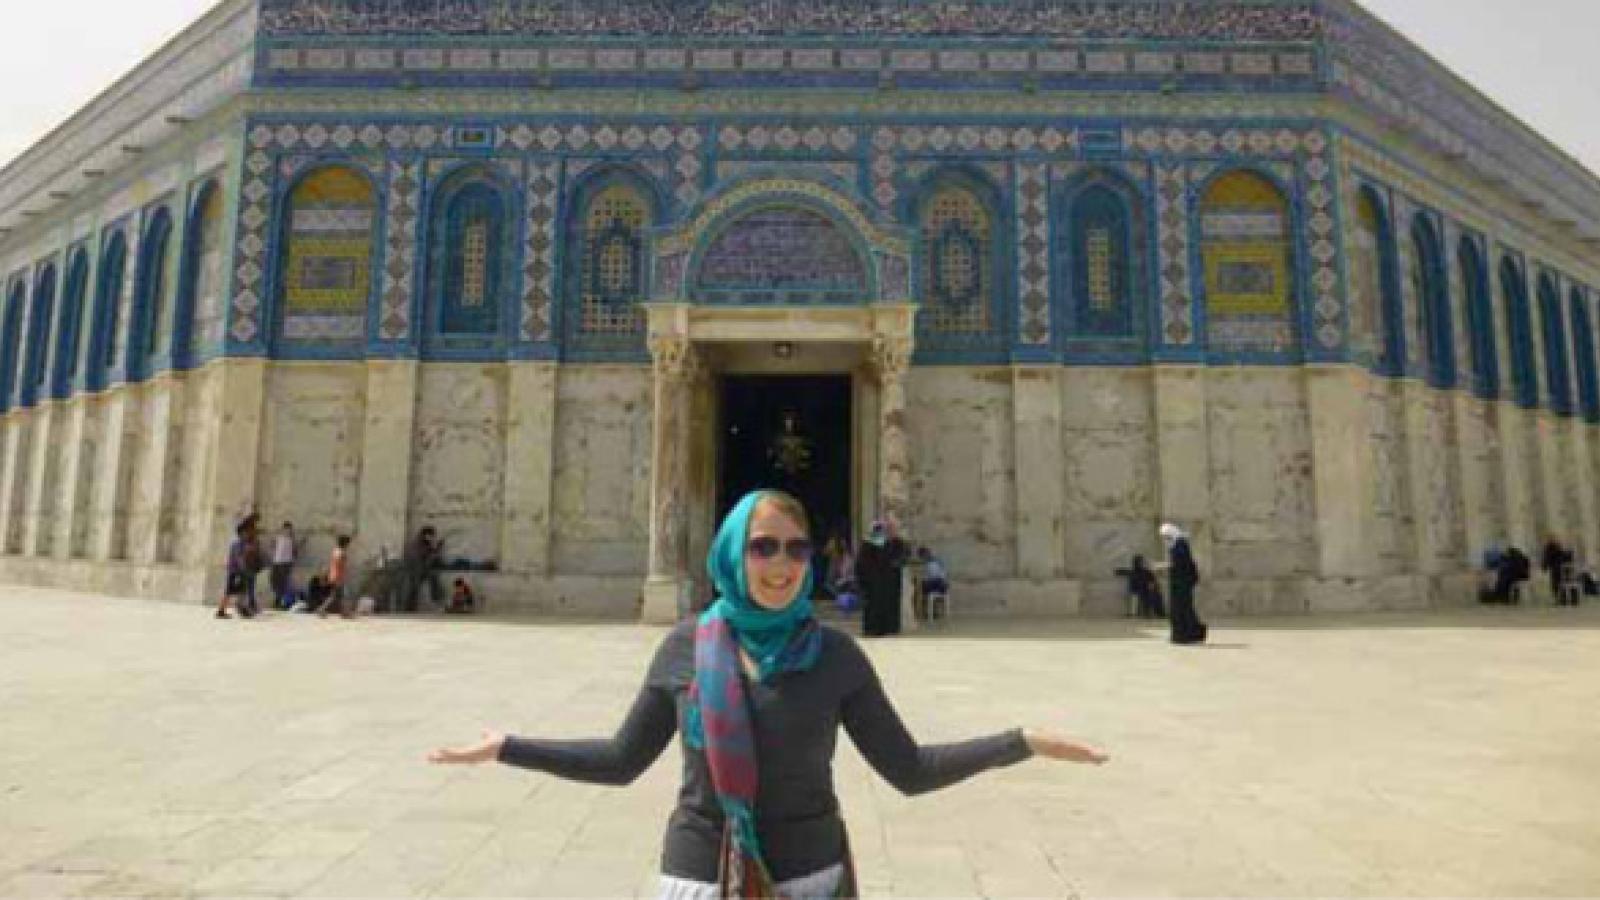 Brianna Baar in front of a mosque.